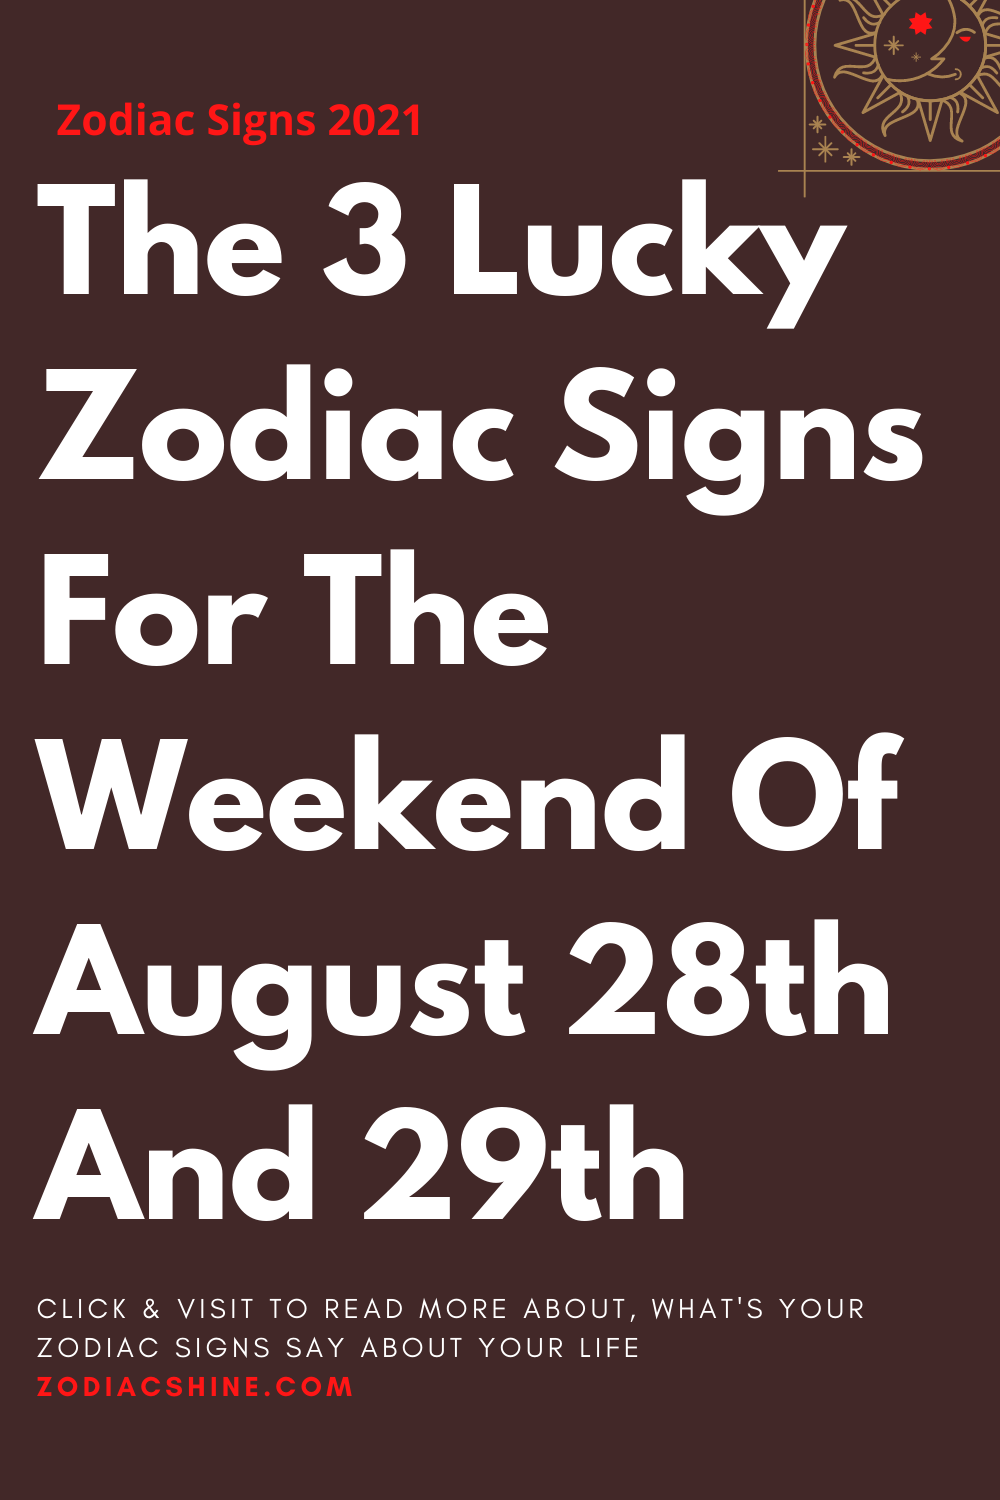 The 3 Lucky Zodiac Signs For The Weekend Of August 28th And 29th